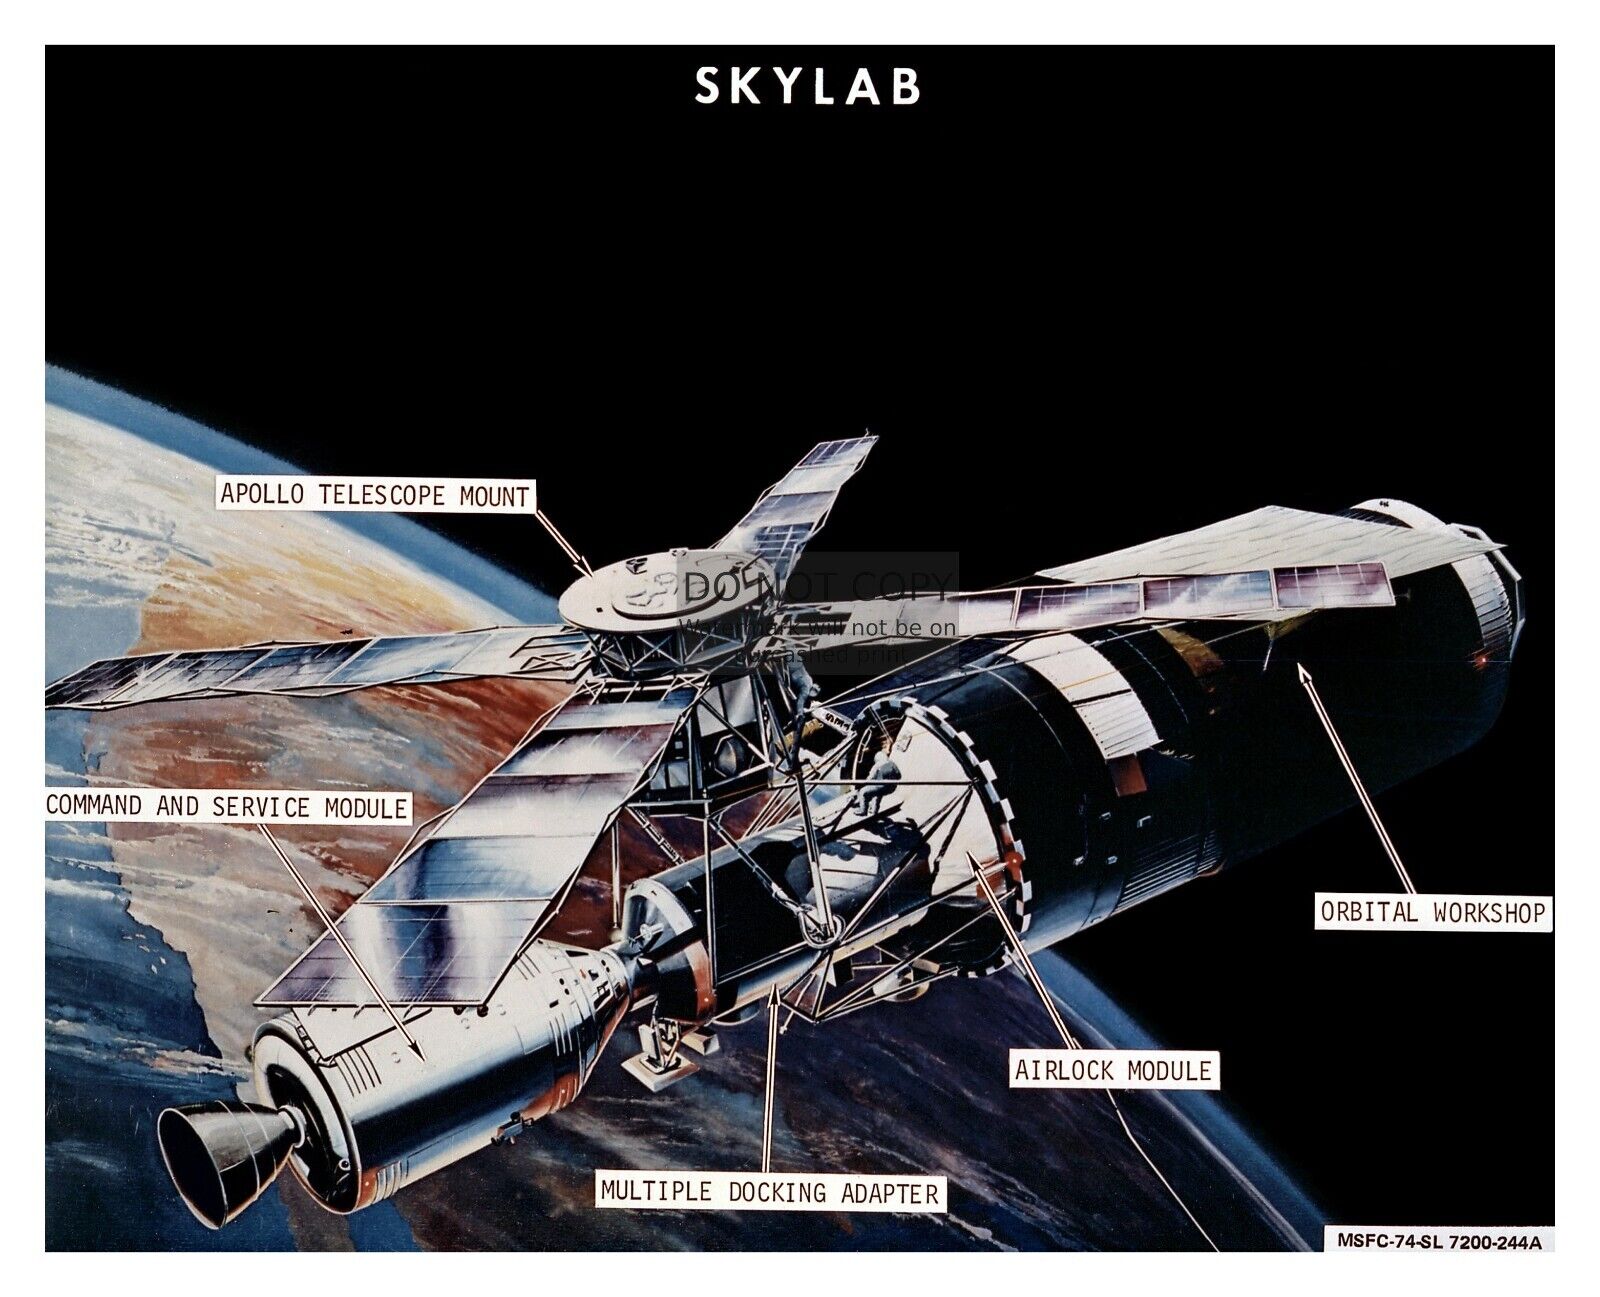 ARTIST'S CONCEPT OF THE SKYLAB SPACE STATION IN ORBIT 8X10 NASA PHOTO